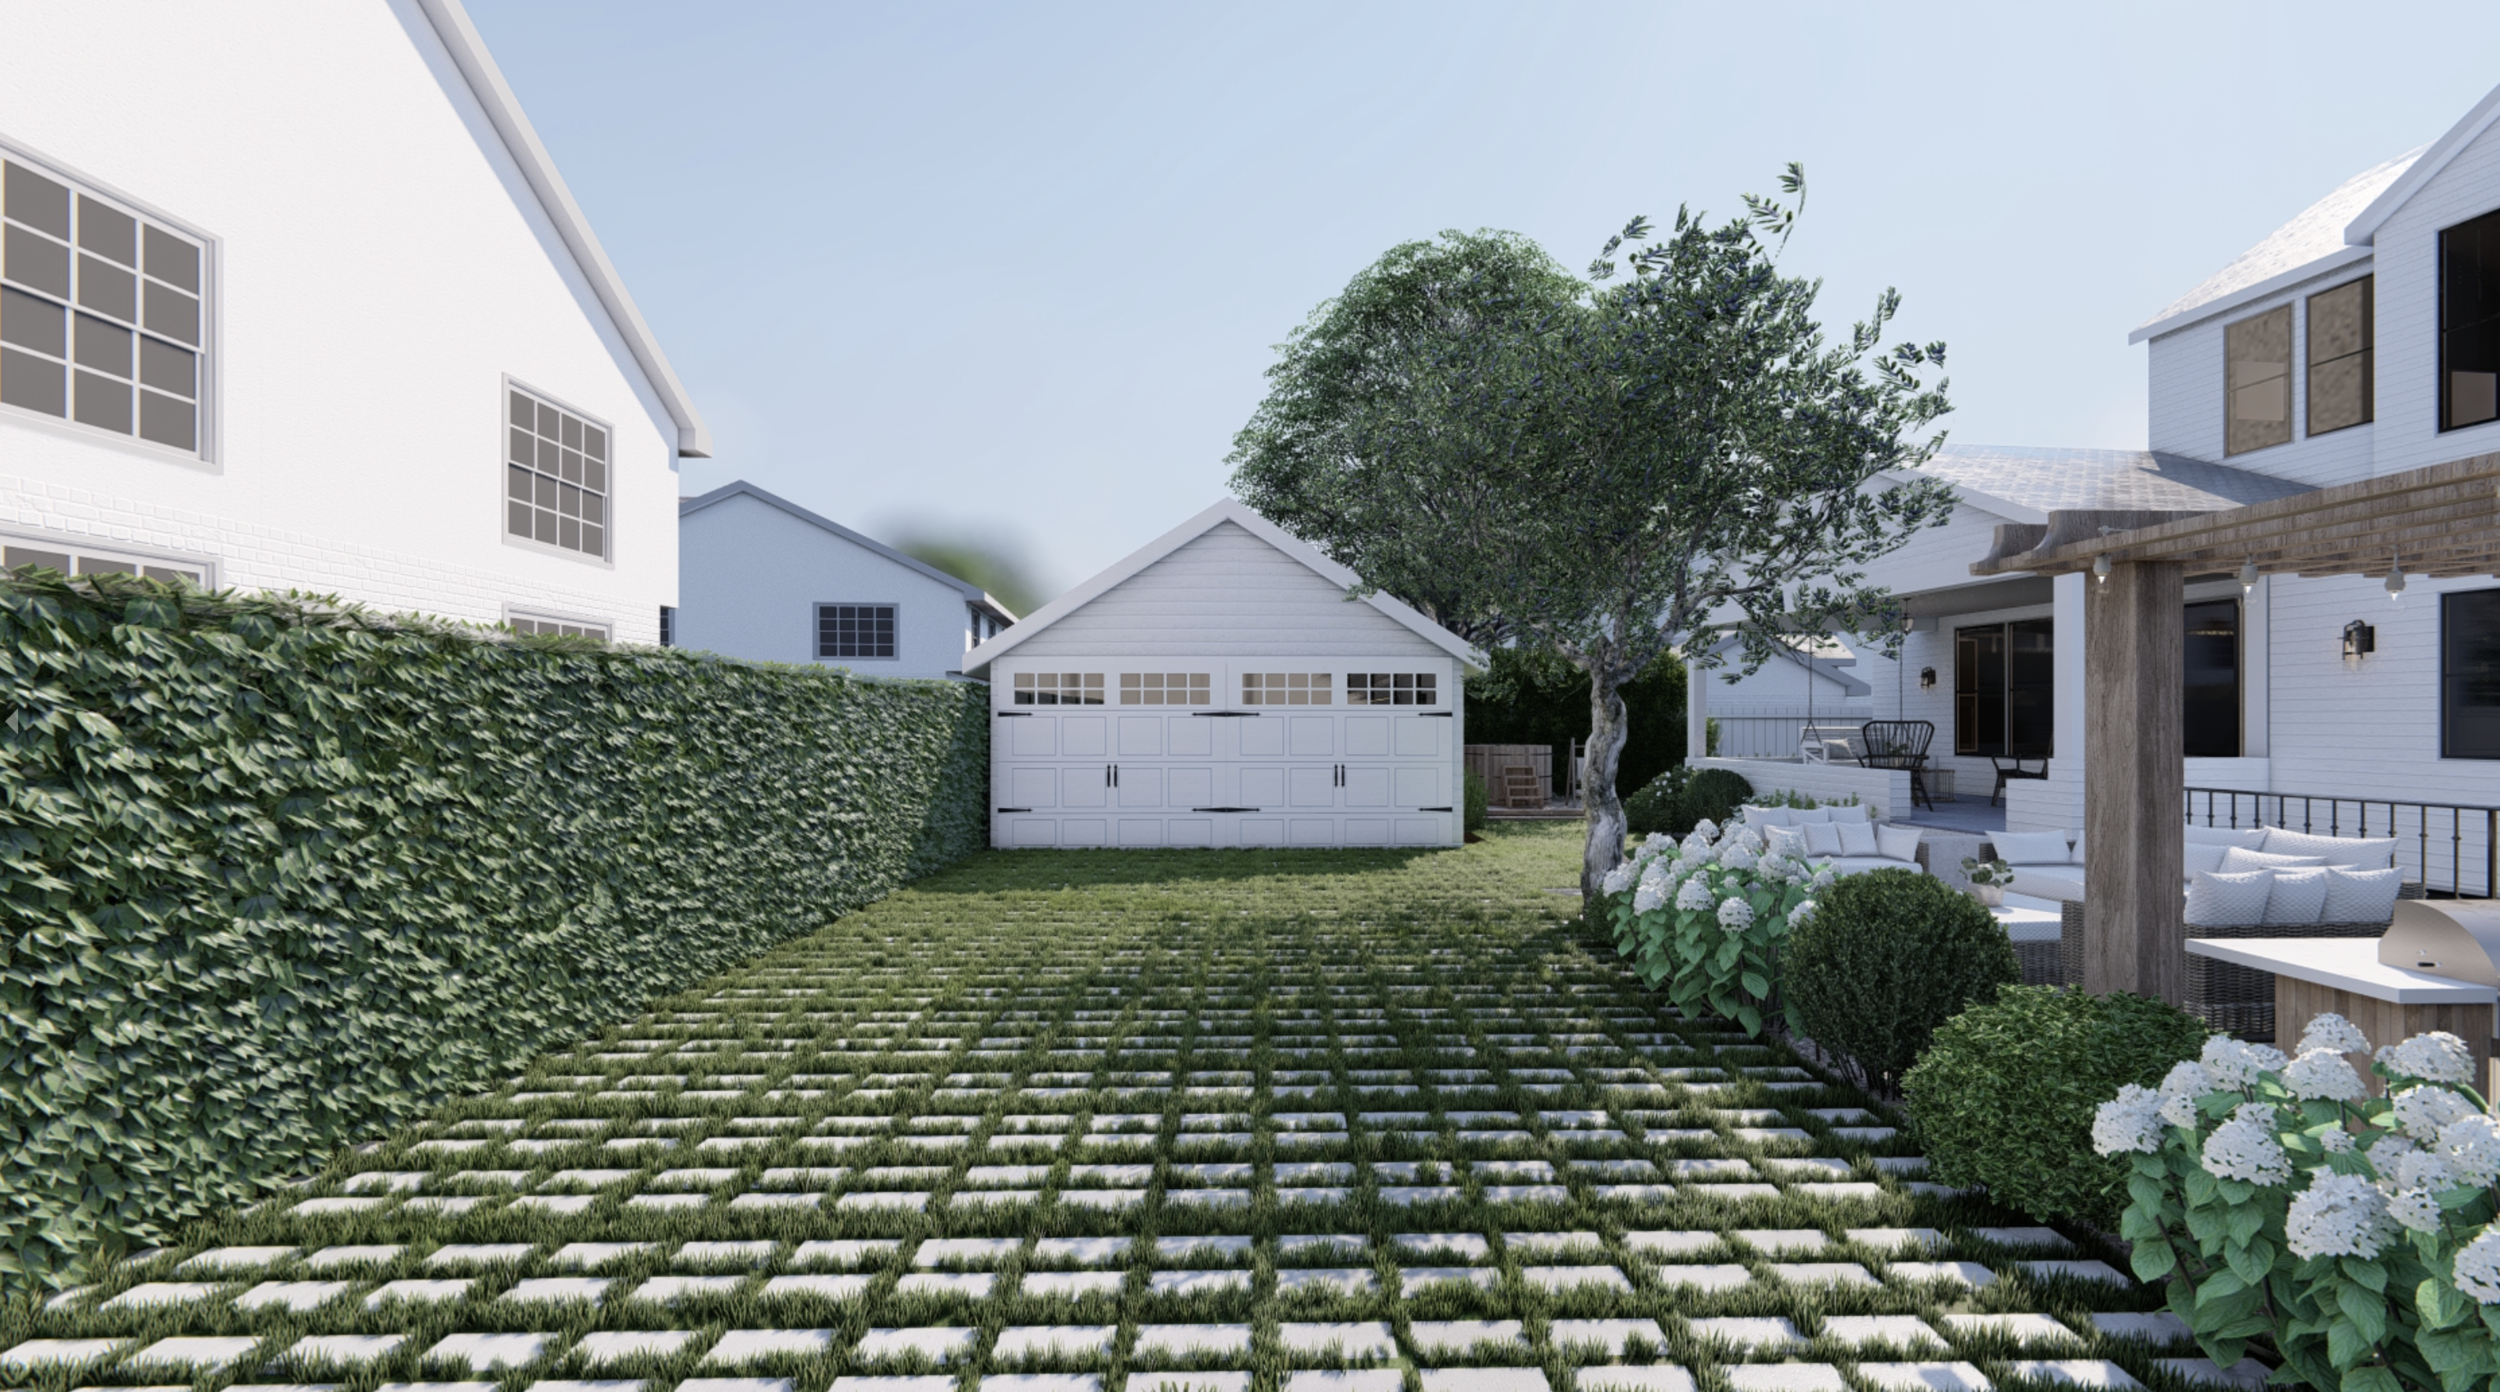 Trellis-fenced paved yard with detached garage, pergola, a sitting area, and lush plants